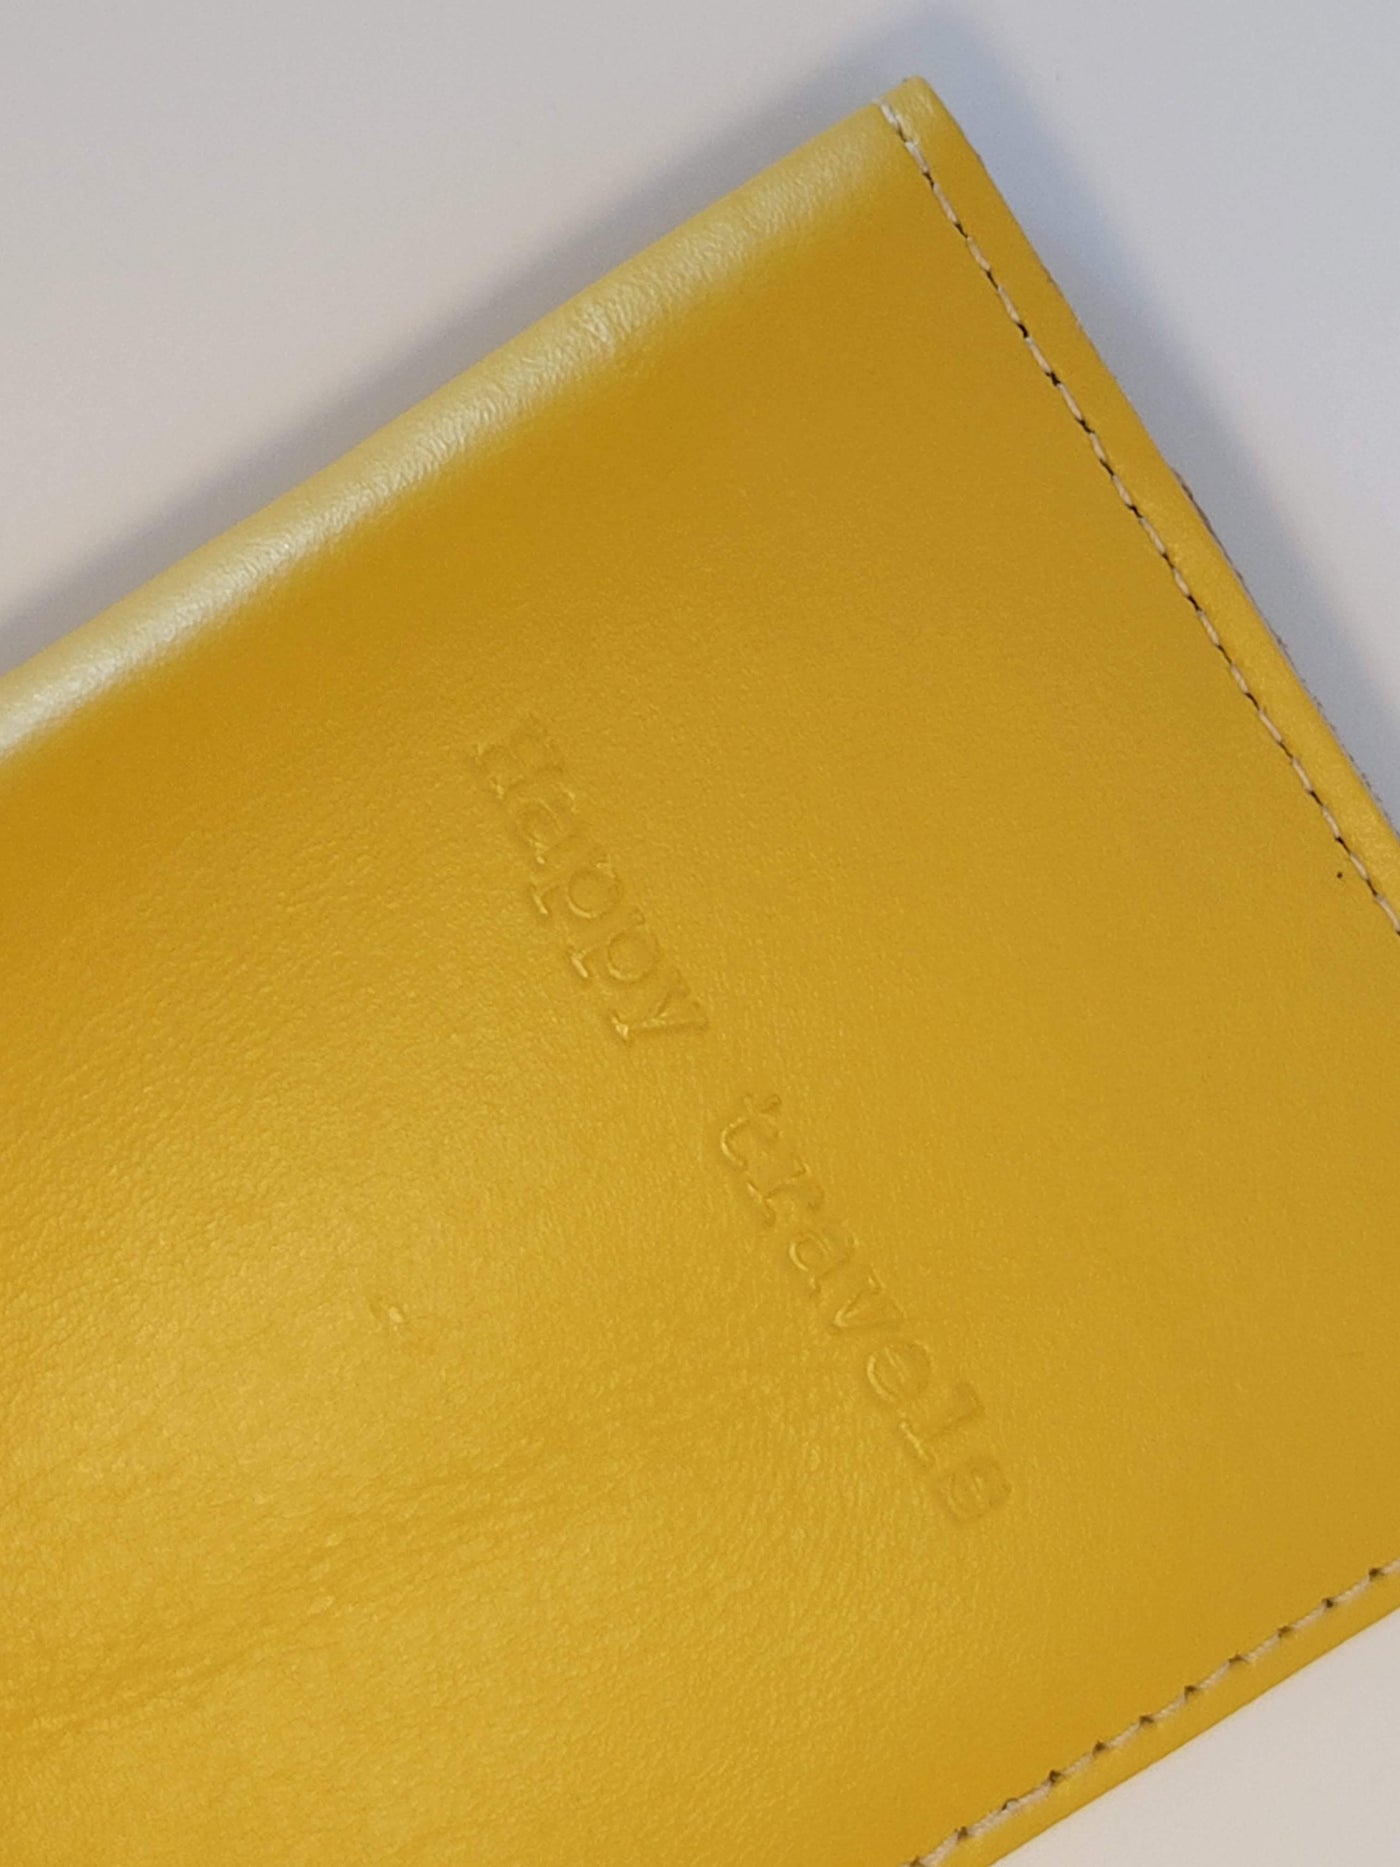 Front close up of mustard yellow passport case with "Happy travels" engraved in the center top of the cover